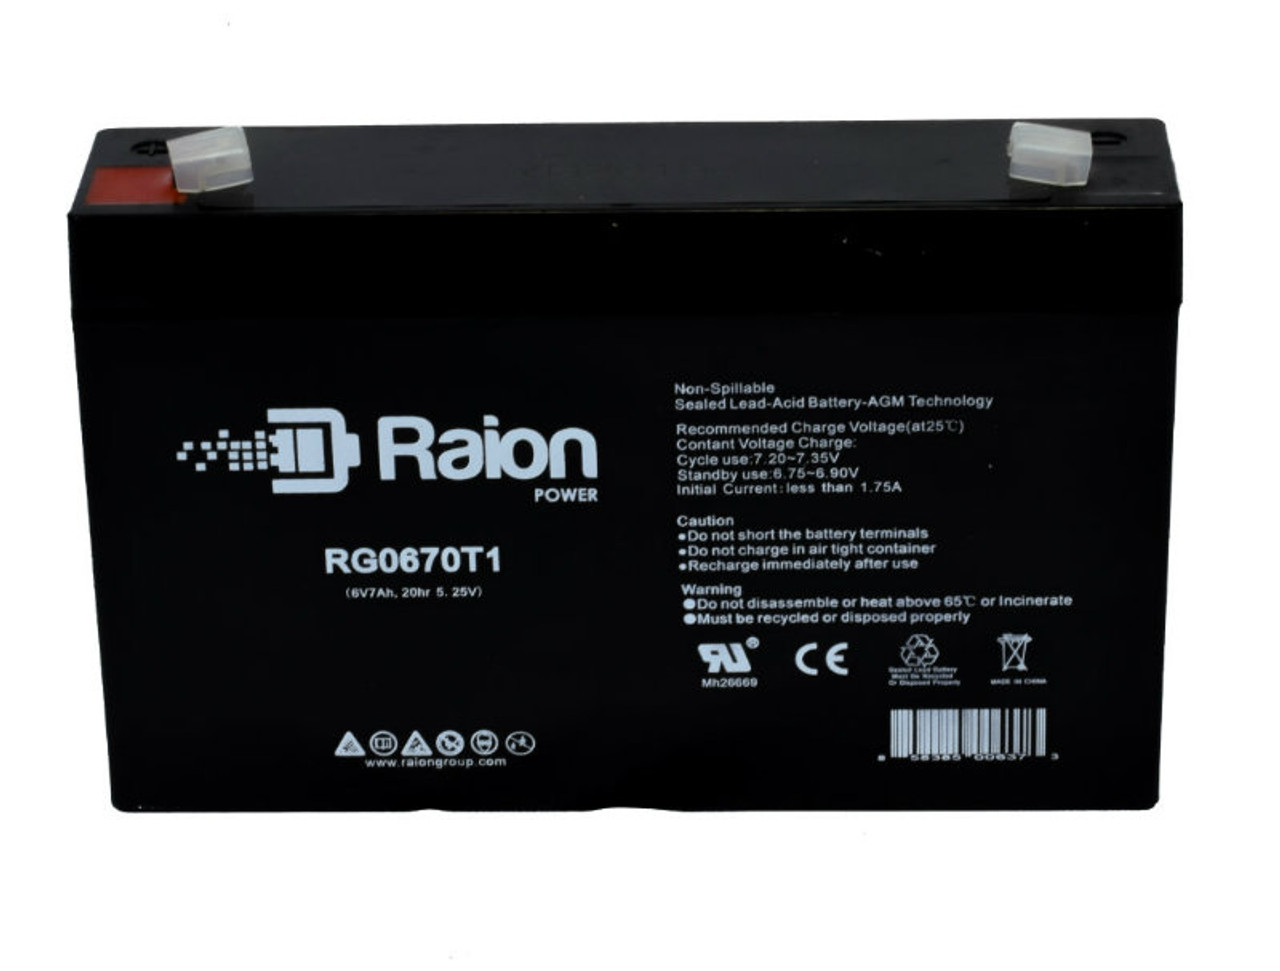 Raion Power RG0670T1 Replacement Battery Cartridge for HRX 6-7